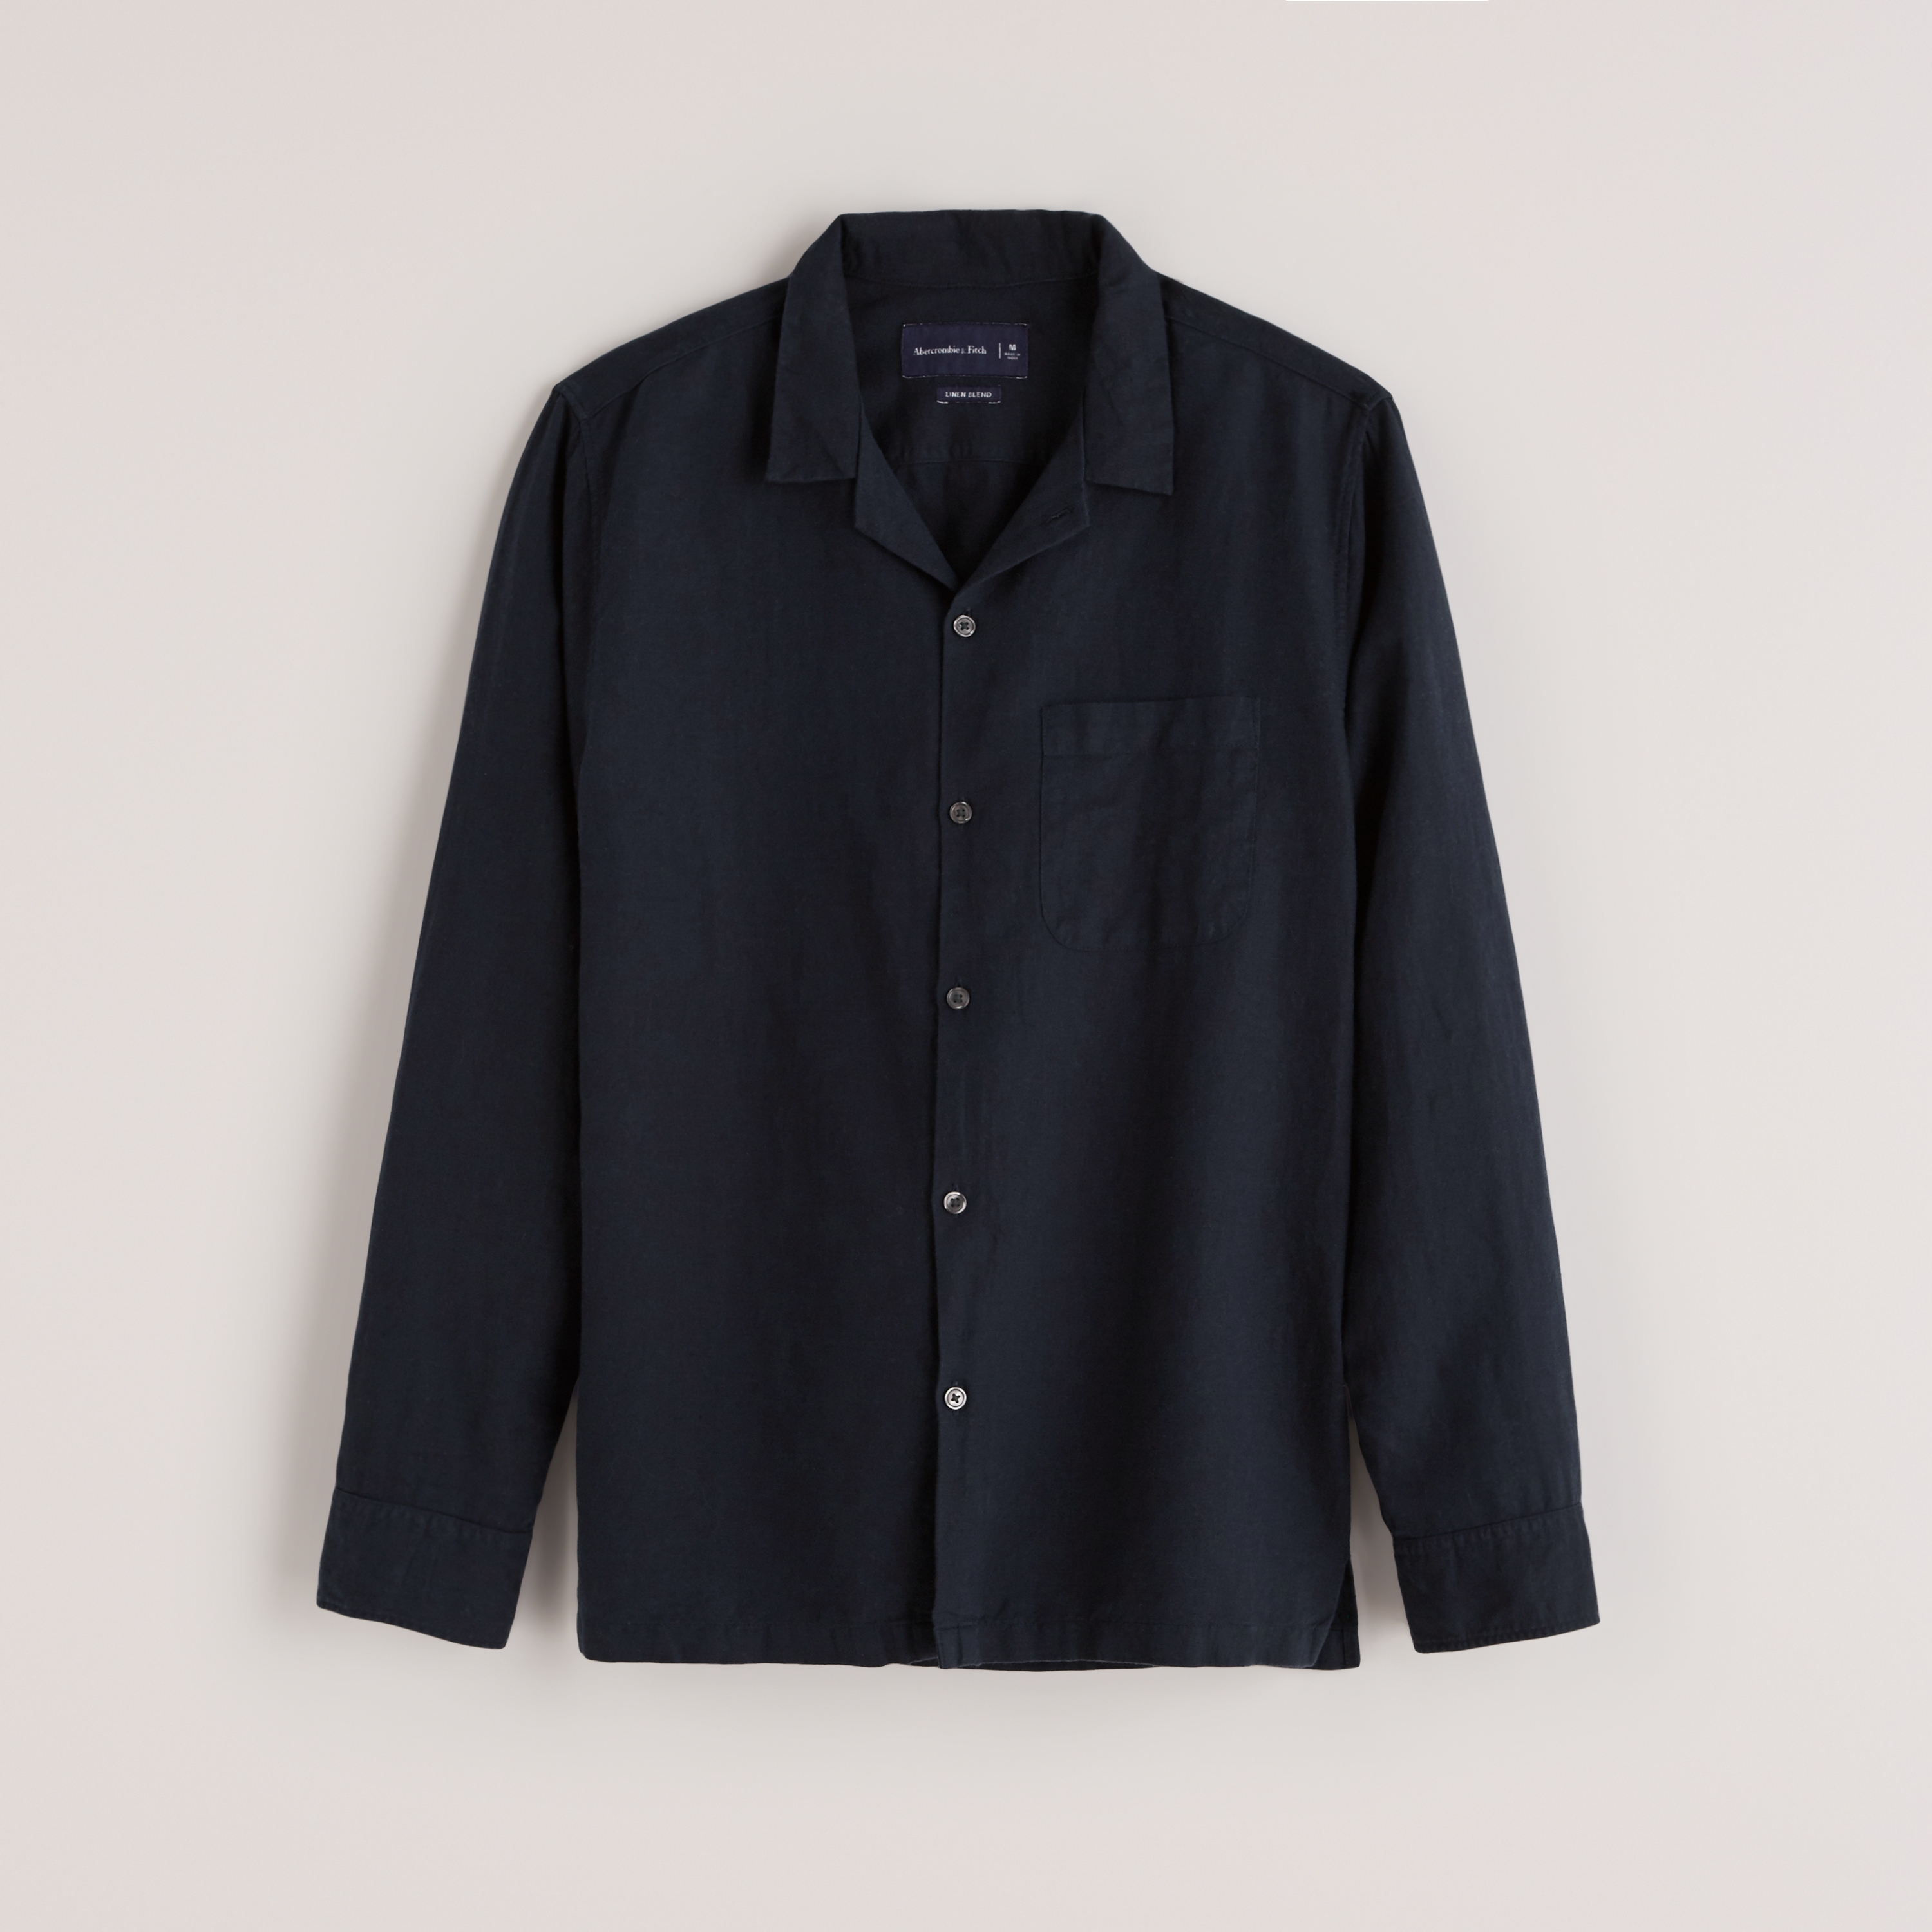 abercrombie and fitch linen shirt